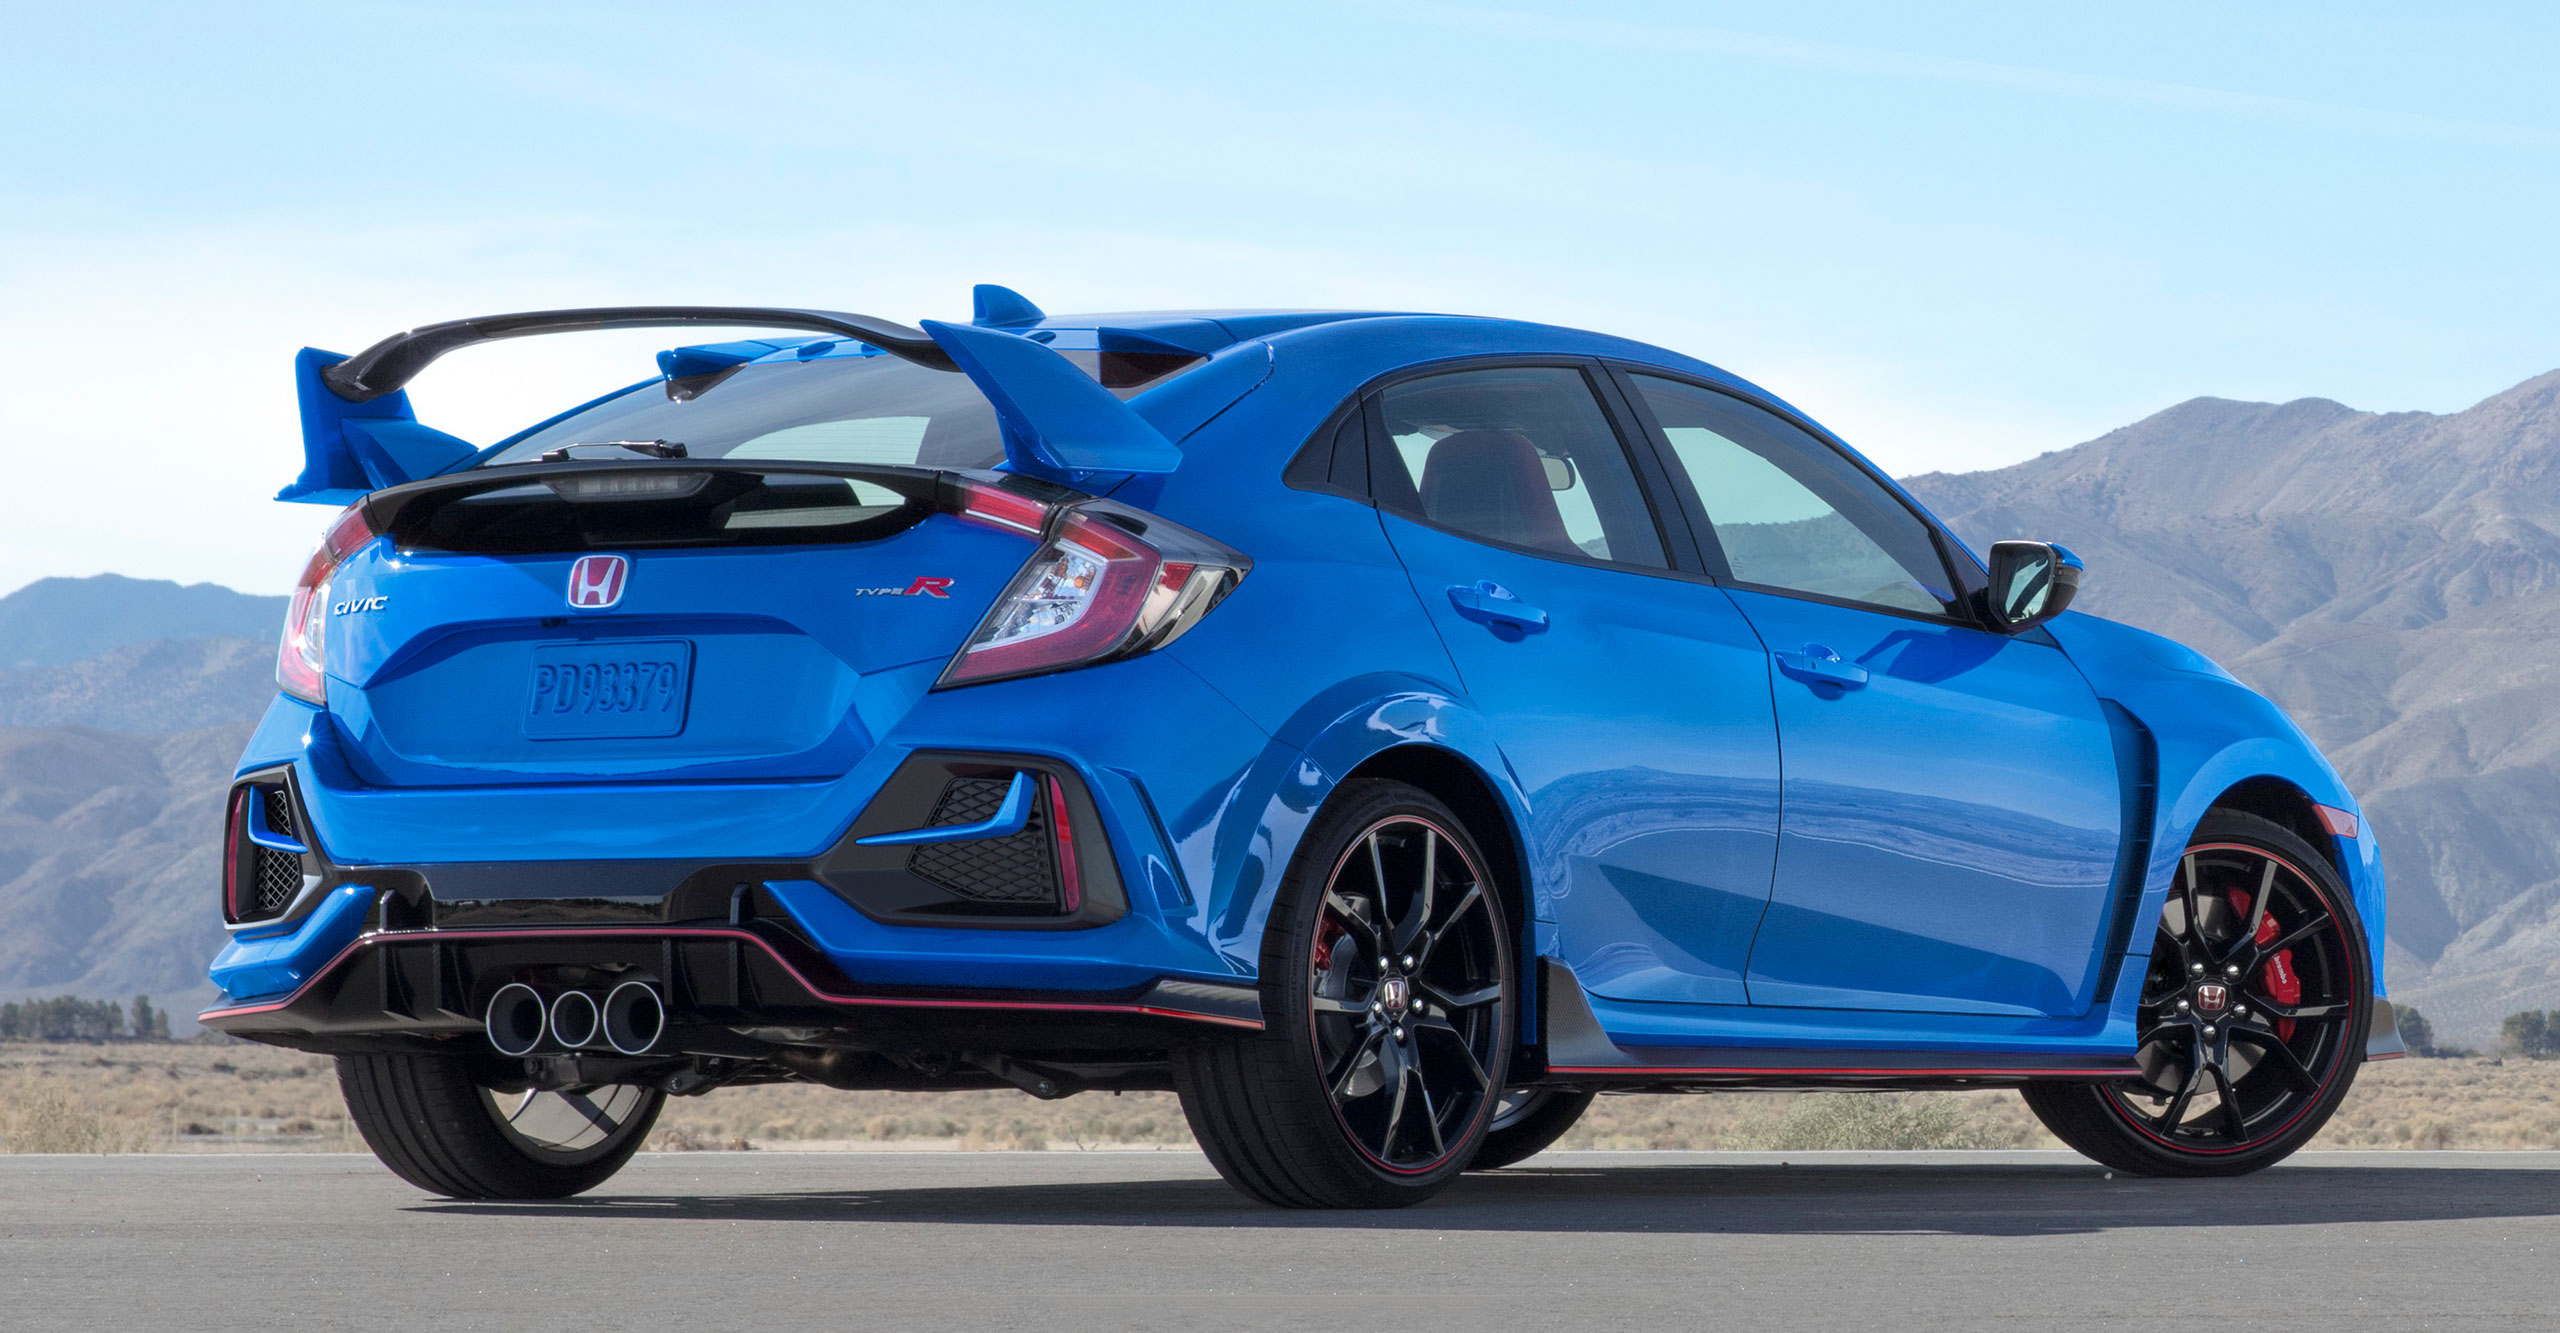 Tas 2020 Fk8 Honda Civic Type R Facelift Official Details Released Better Aero Dynamics And Safety Paultan Org